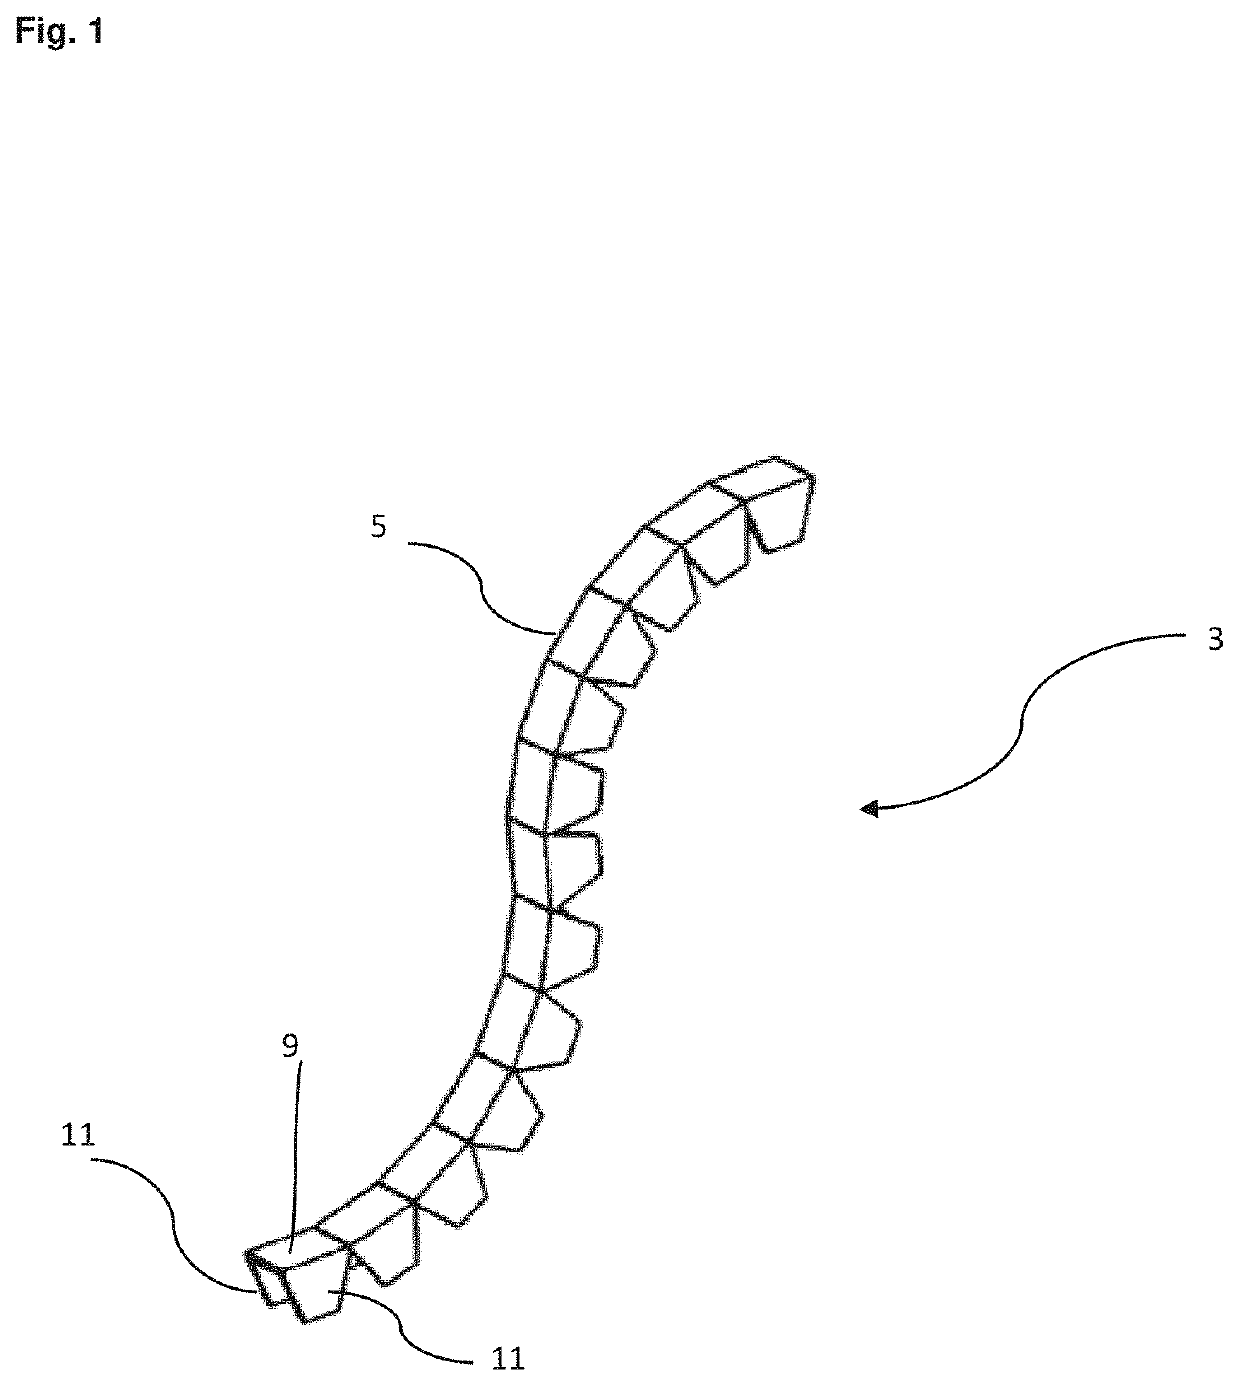 Reinforcement structure and process for reinforcement of a panel element